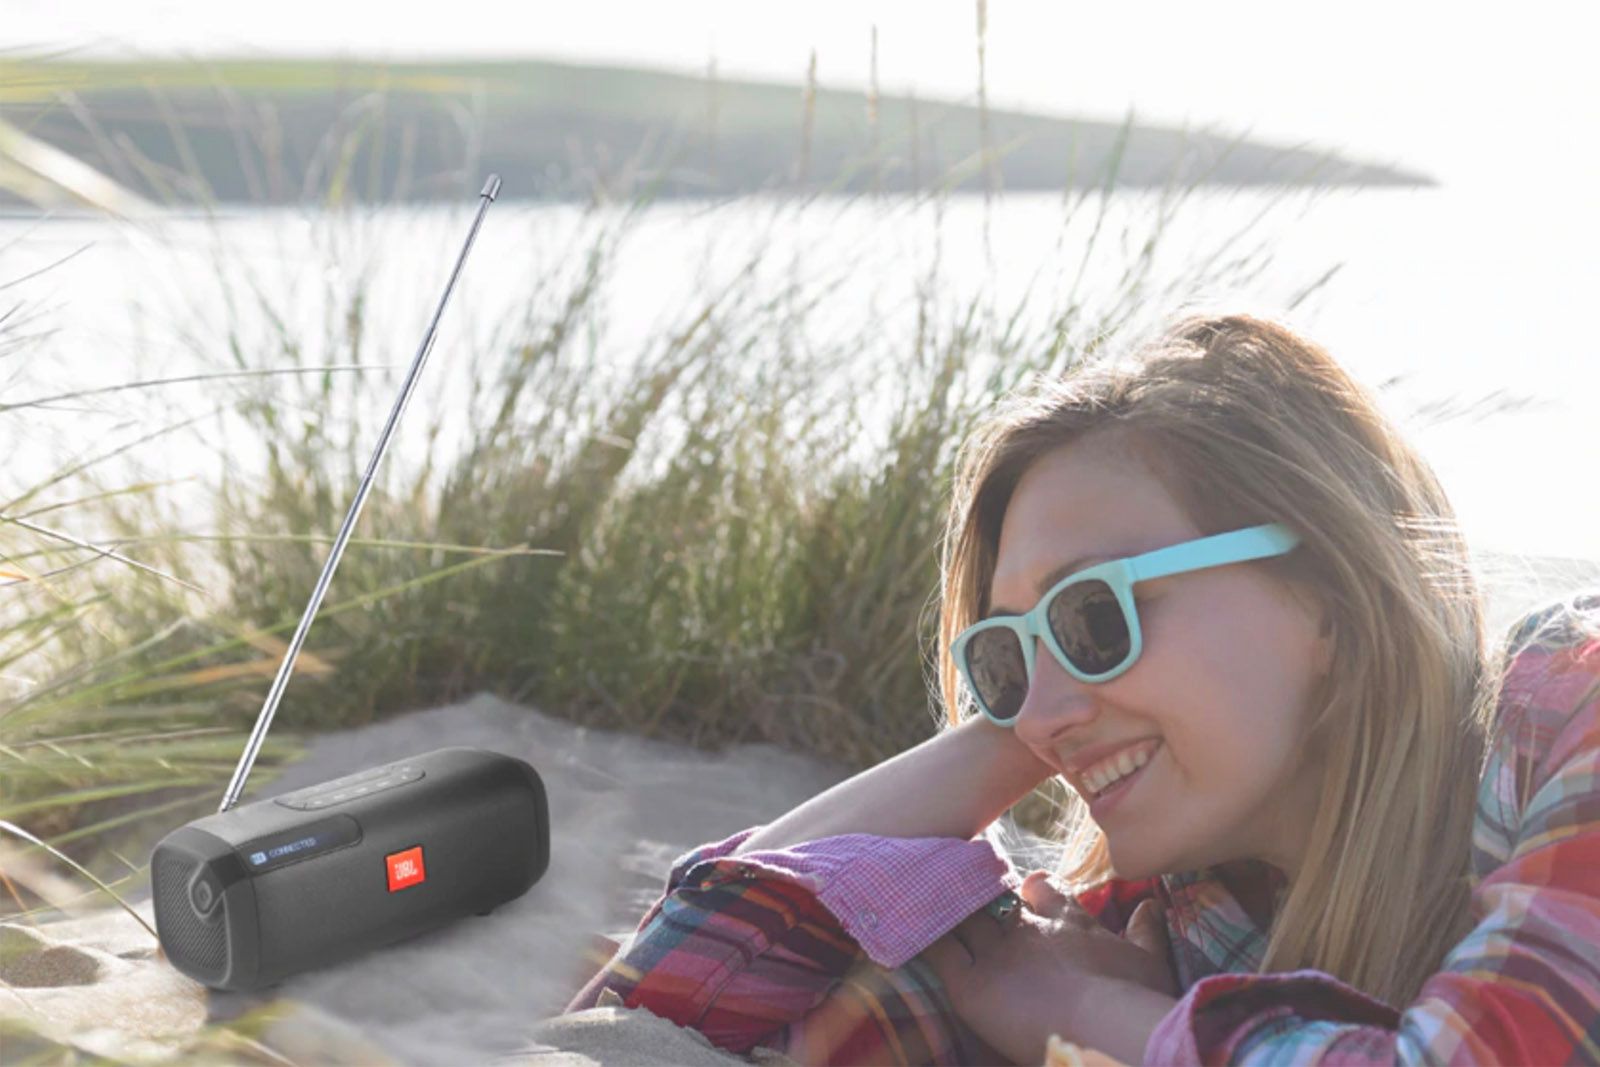 JBL Tuner is the portable radio for the Bluetooth generation image 1